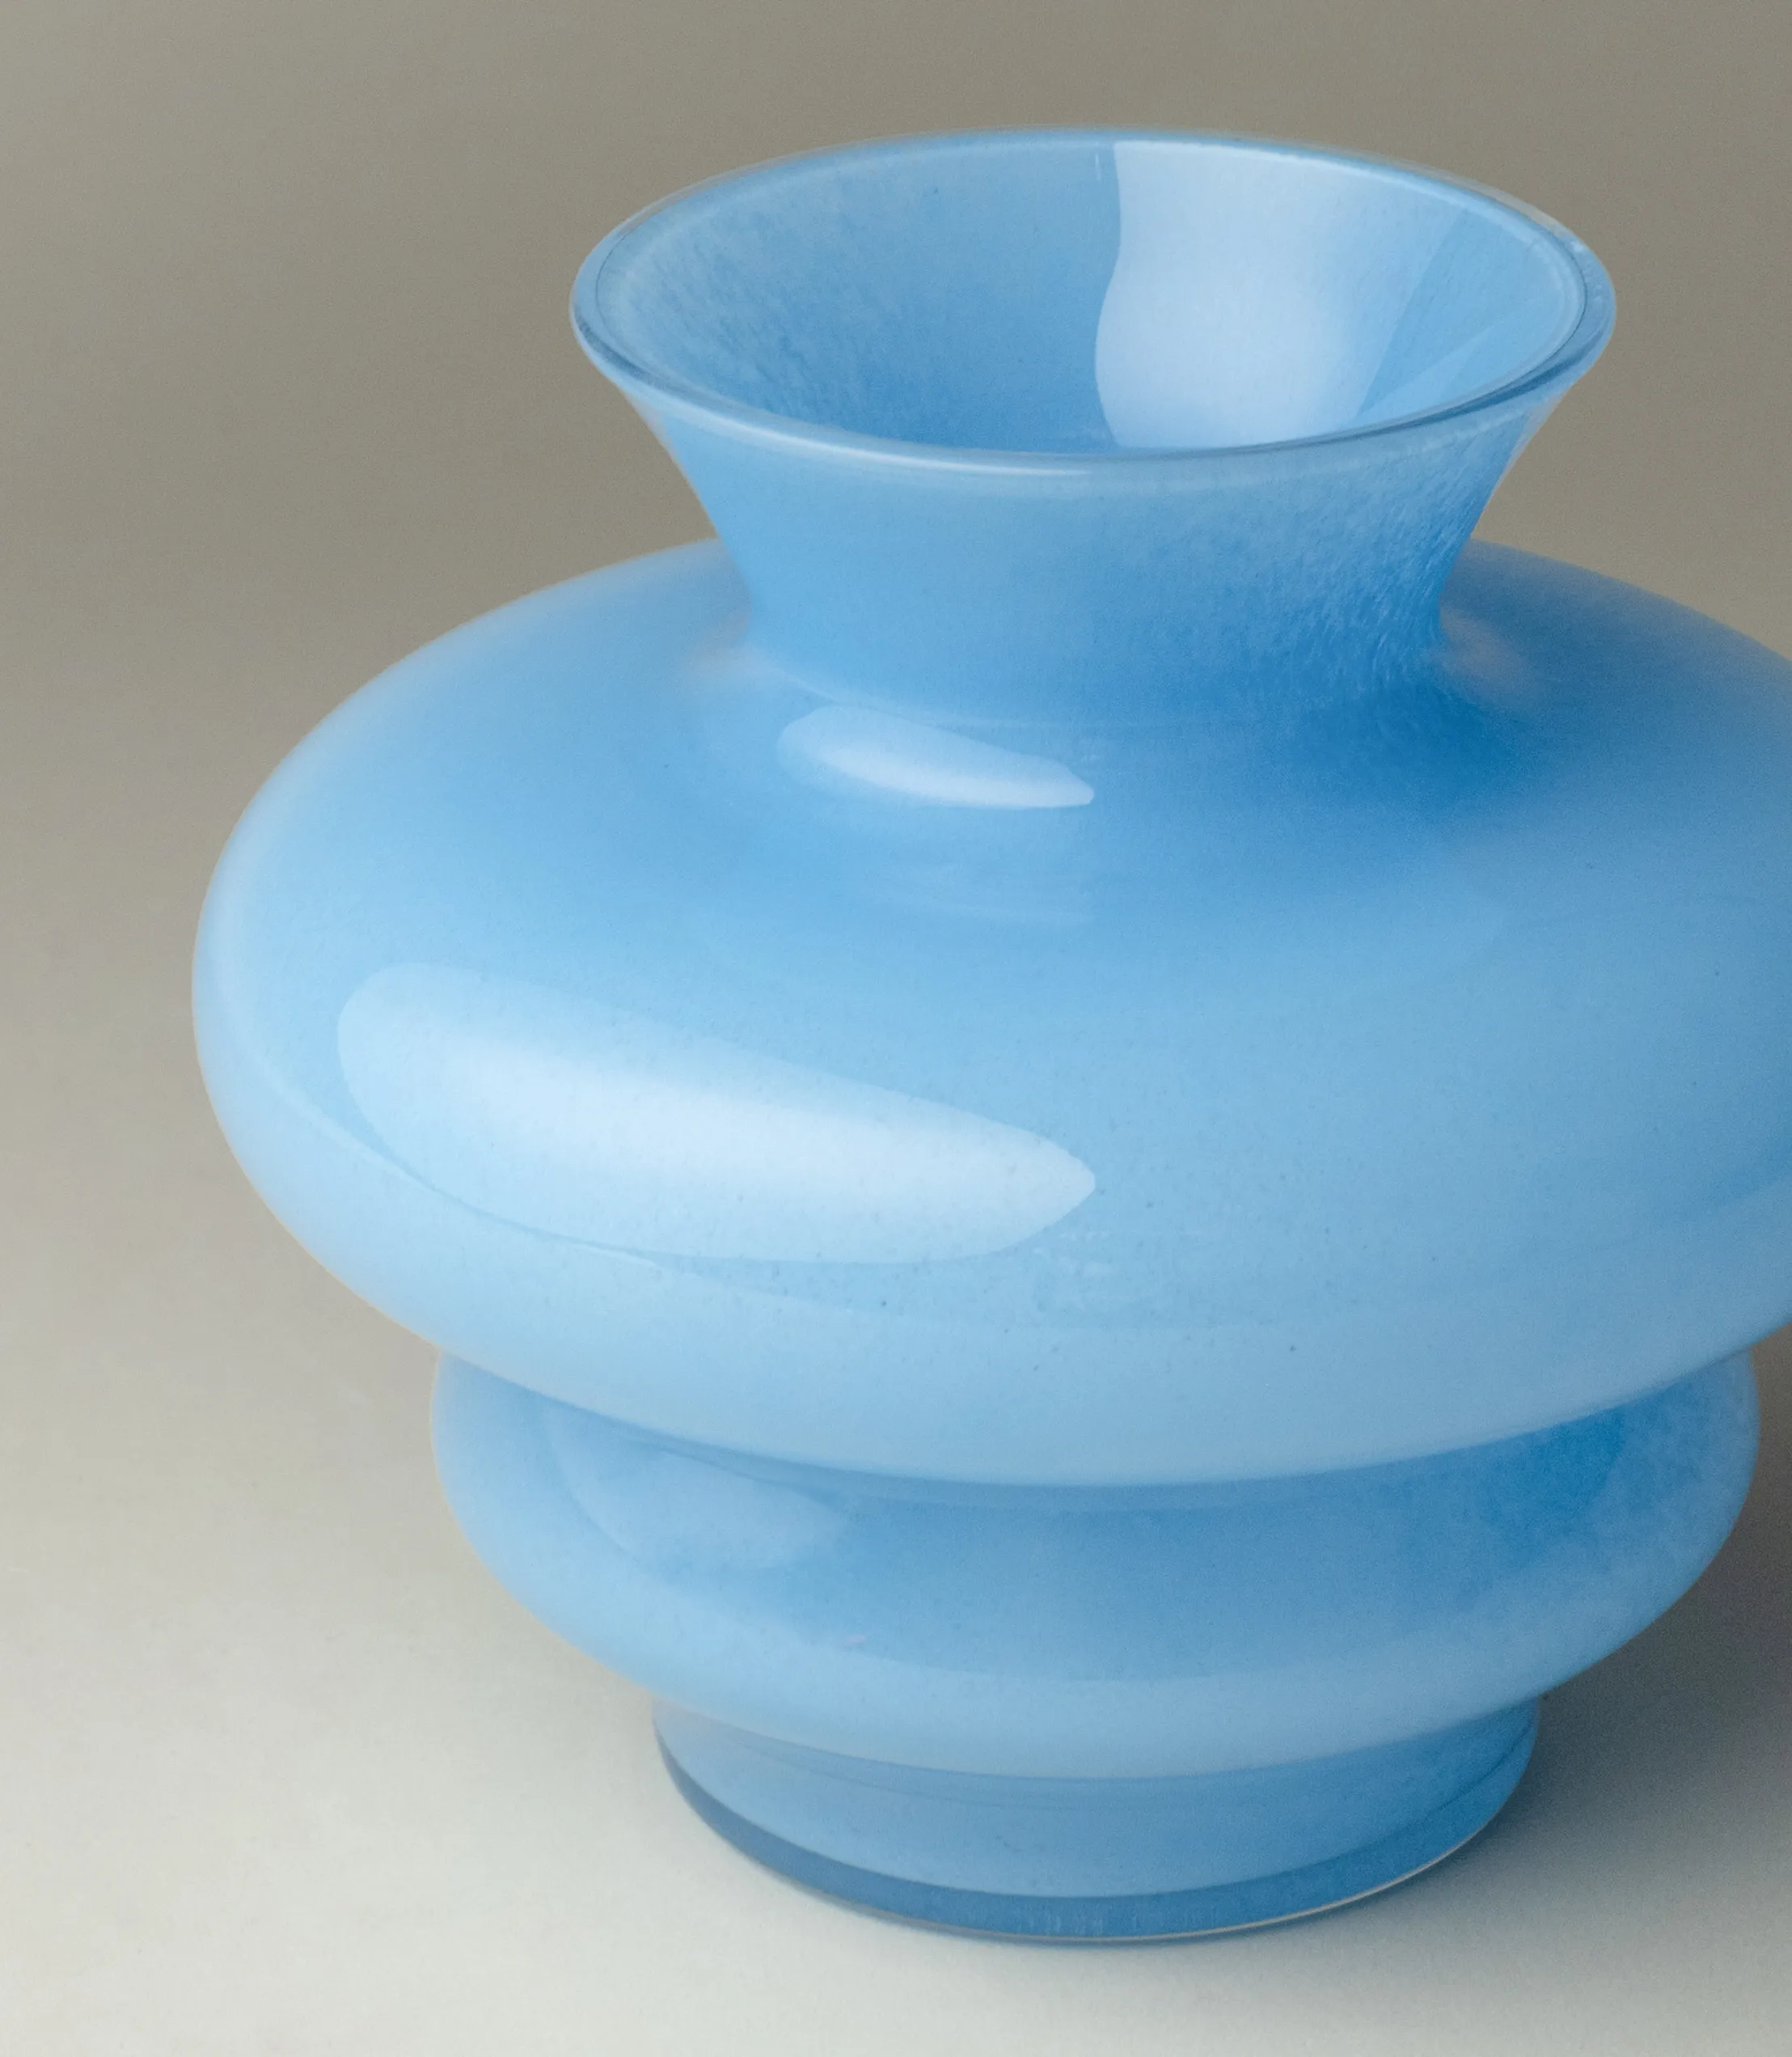 A Closeup of the Blue Curve Mini Vase from Stences. The material of the item is glass